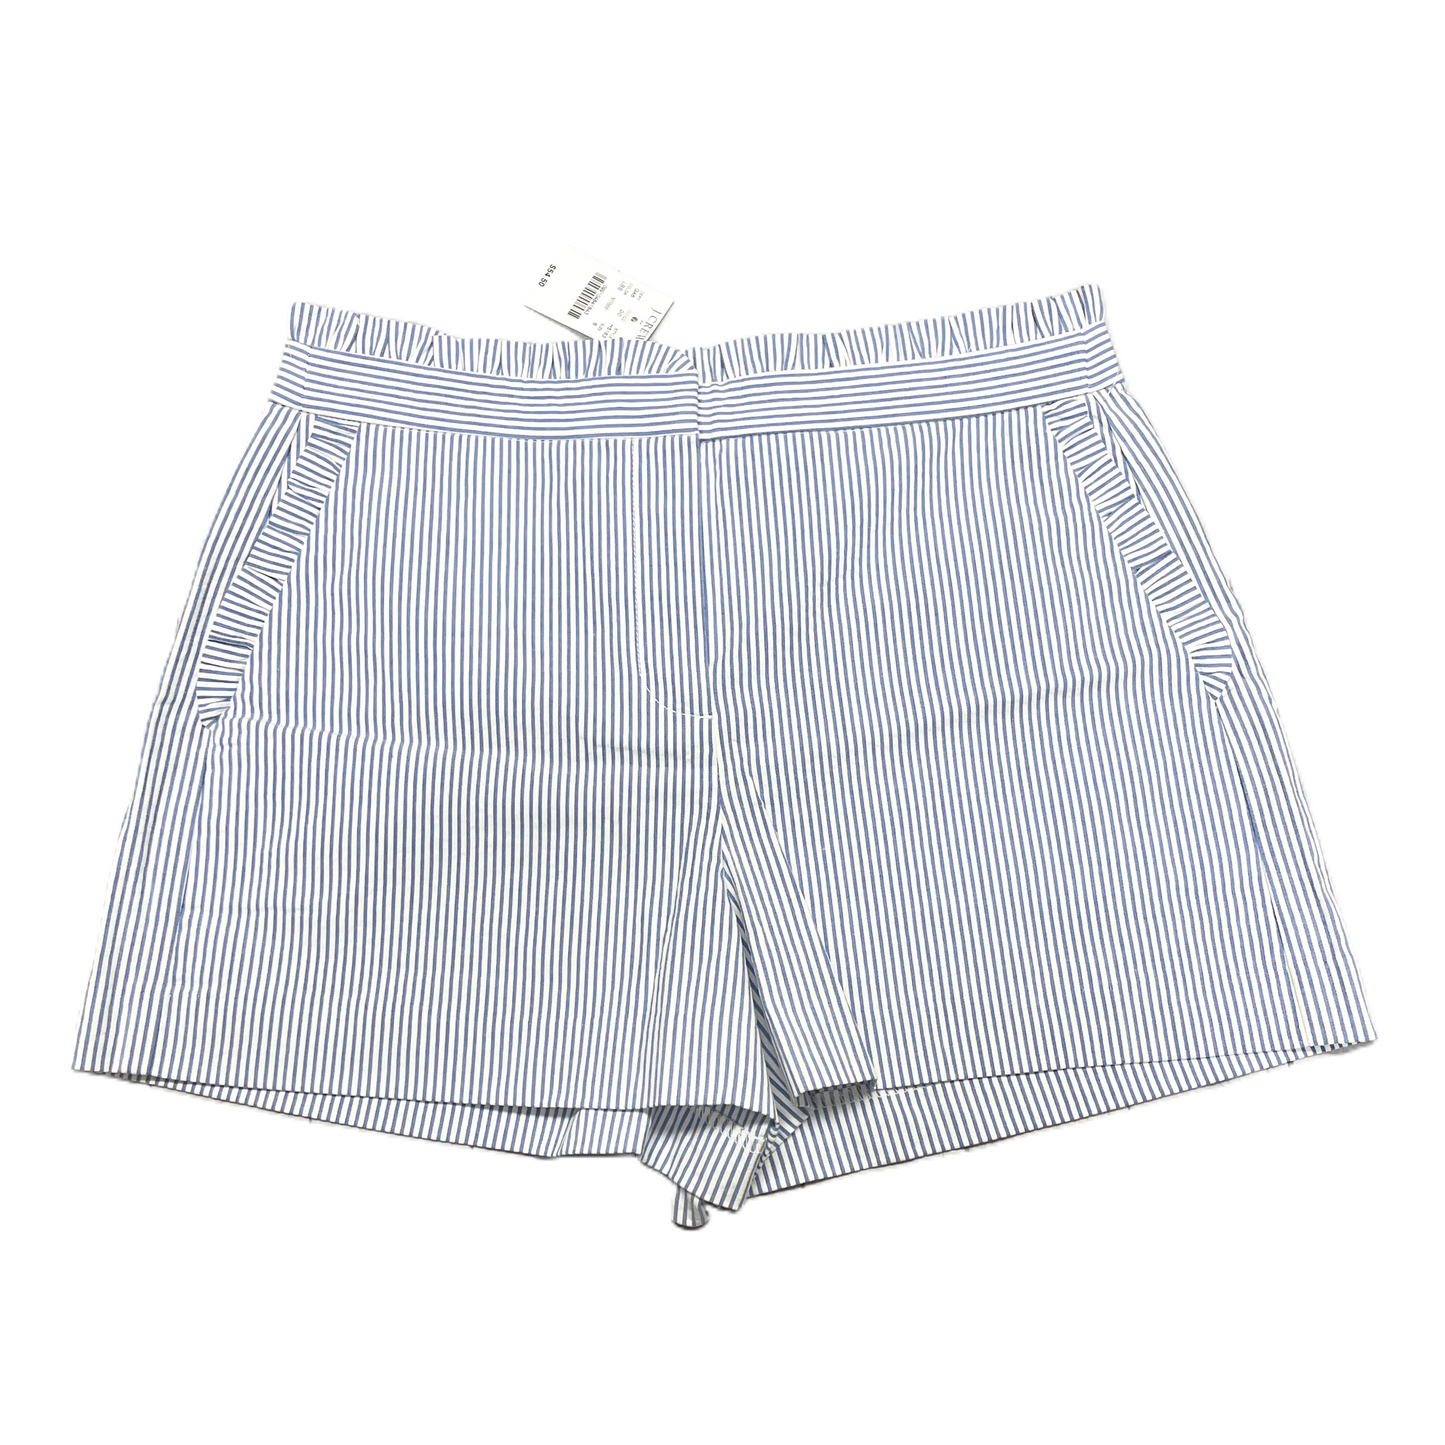 Blue & White Shorts By J. Crew, Size: 6